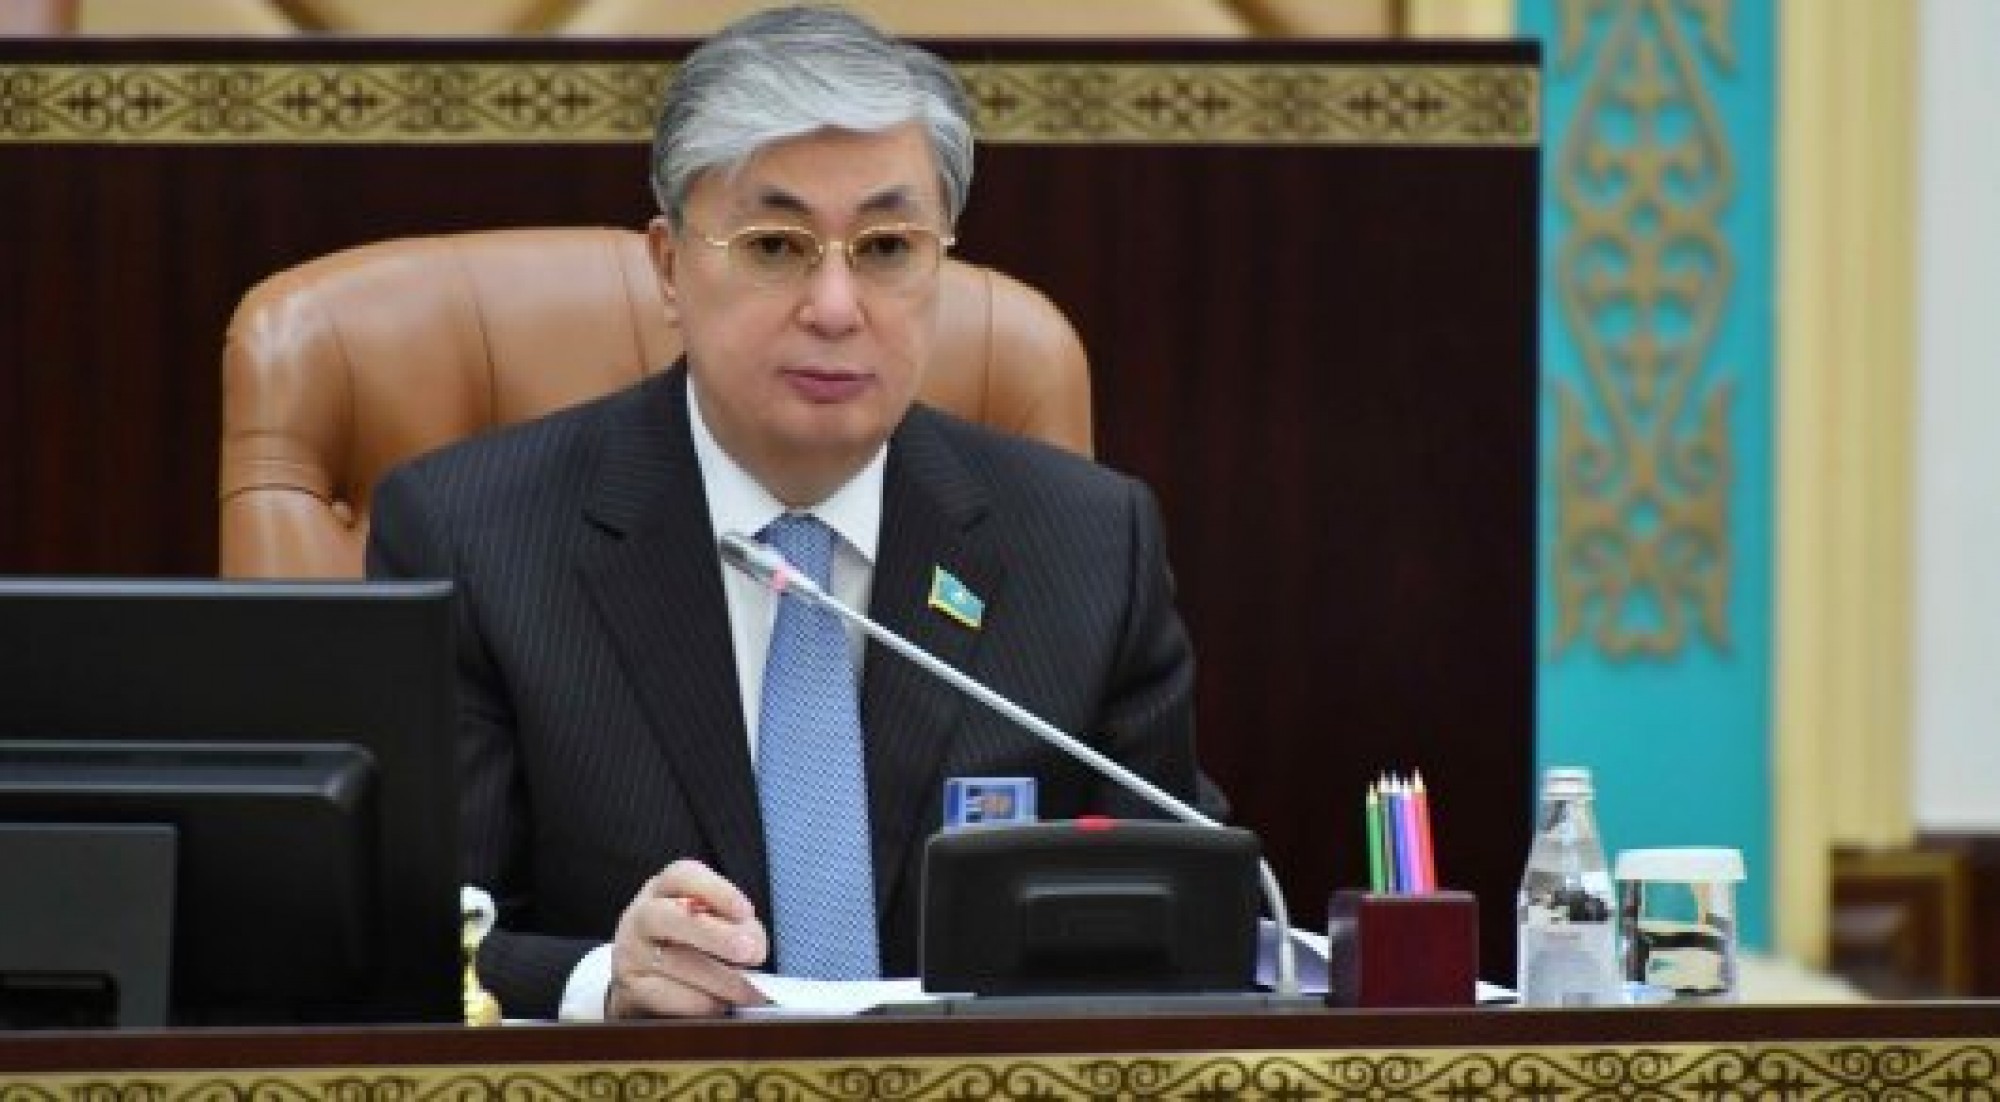 Speaker Tokayev comments the meeting between Nazarbayev and Trump